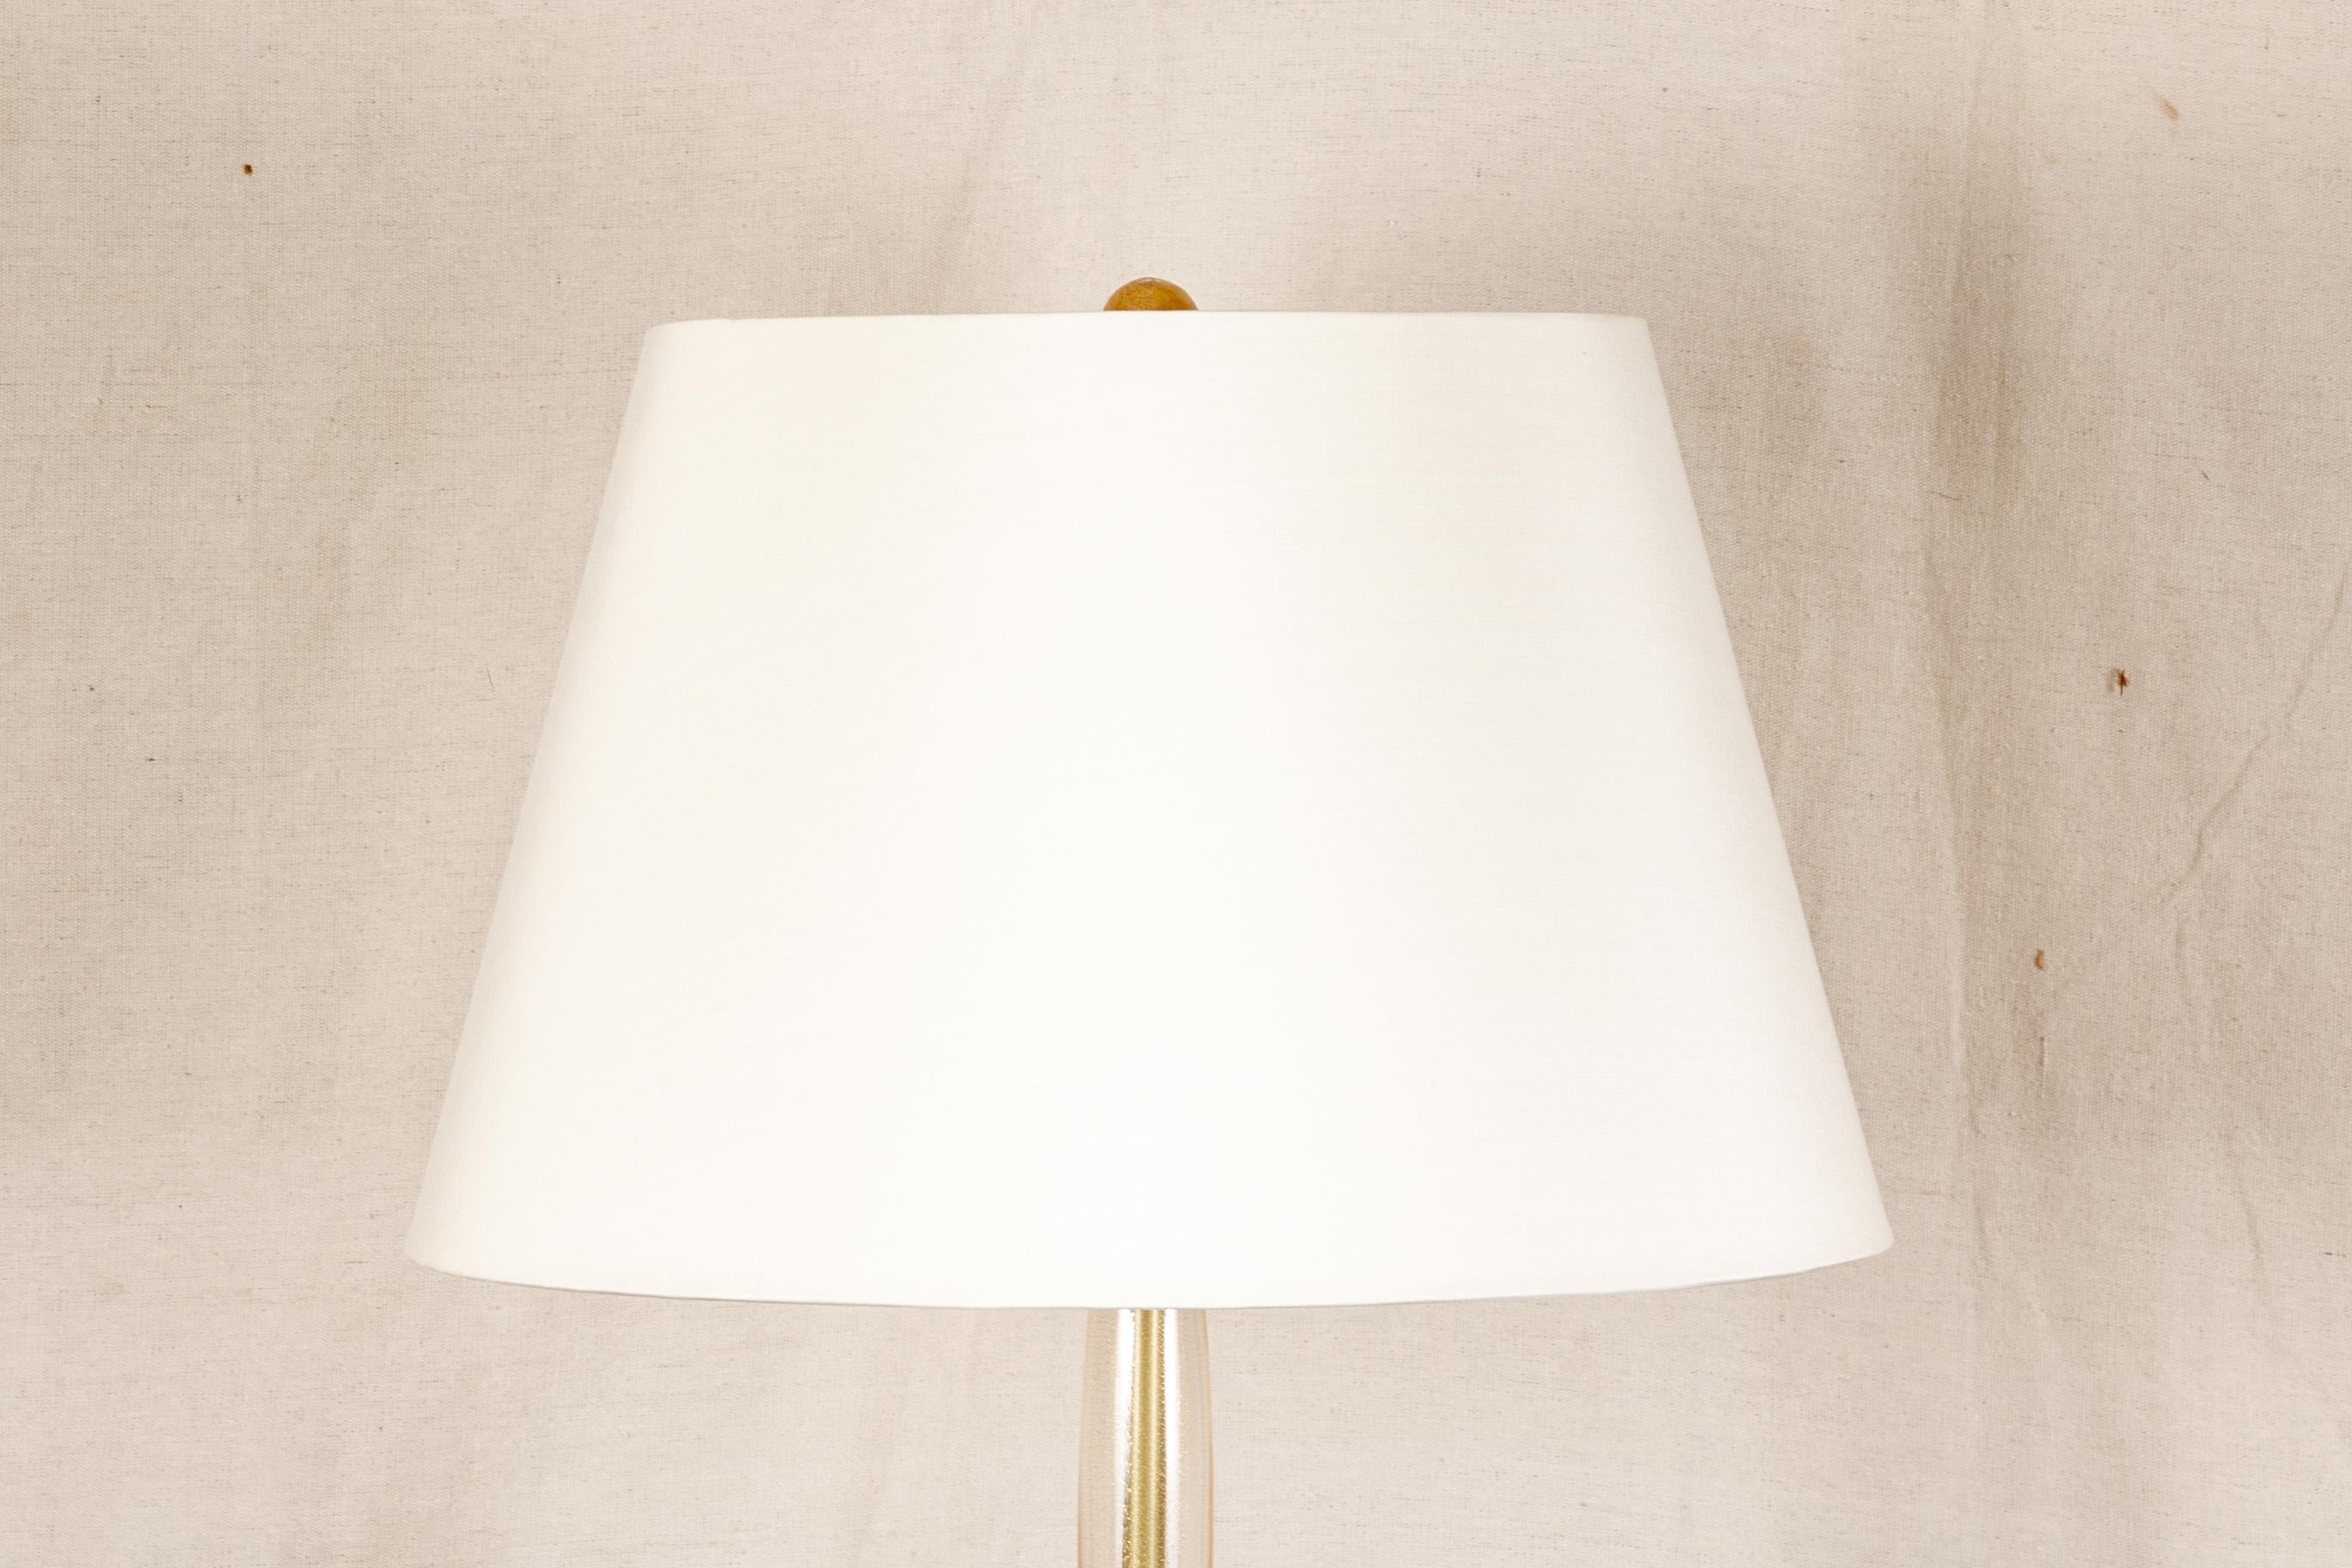 Contemporary twin light gilt Murano glass floor lamp, segmented gilt Murano glass standard with rings and a gilt interior shaft, a round base and ball finial. Twin lights with a white fabric shade. 

Condition: In good, gently used condition.